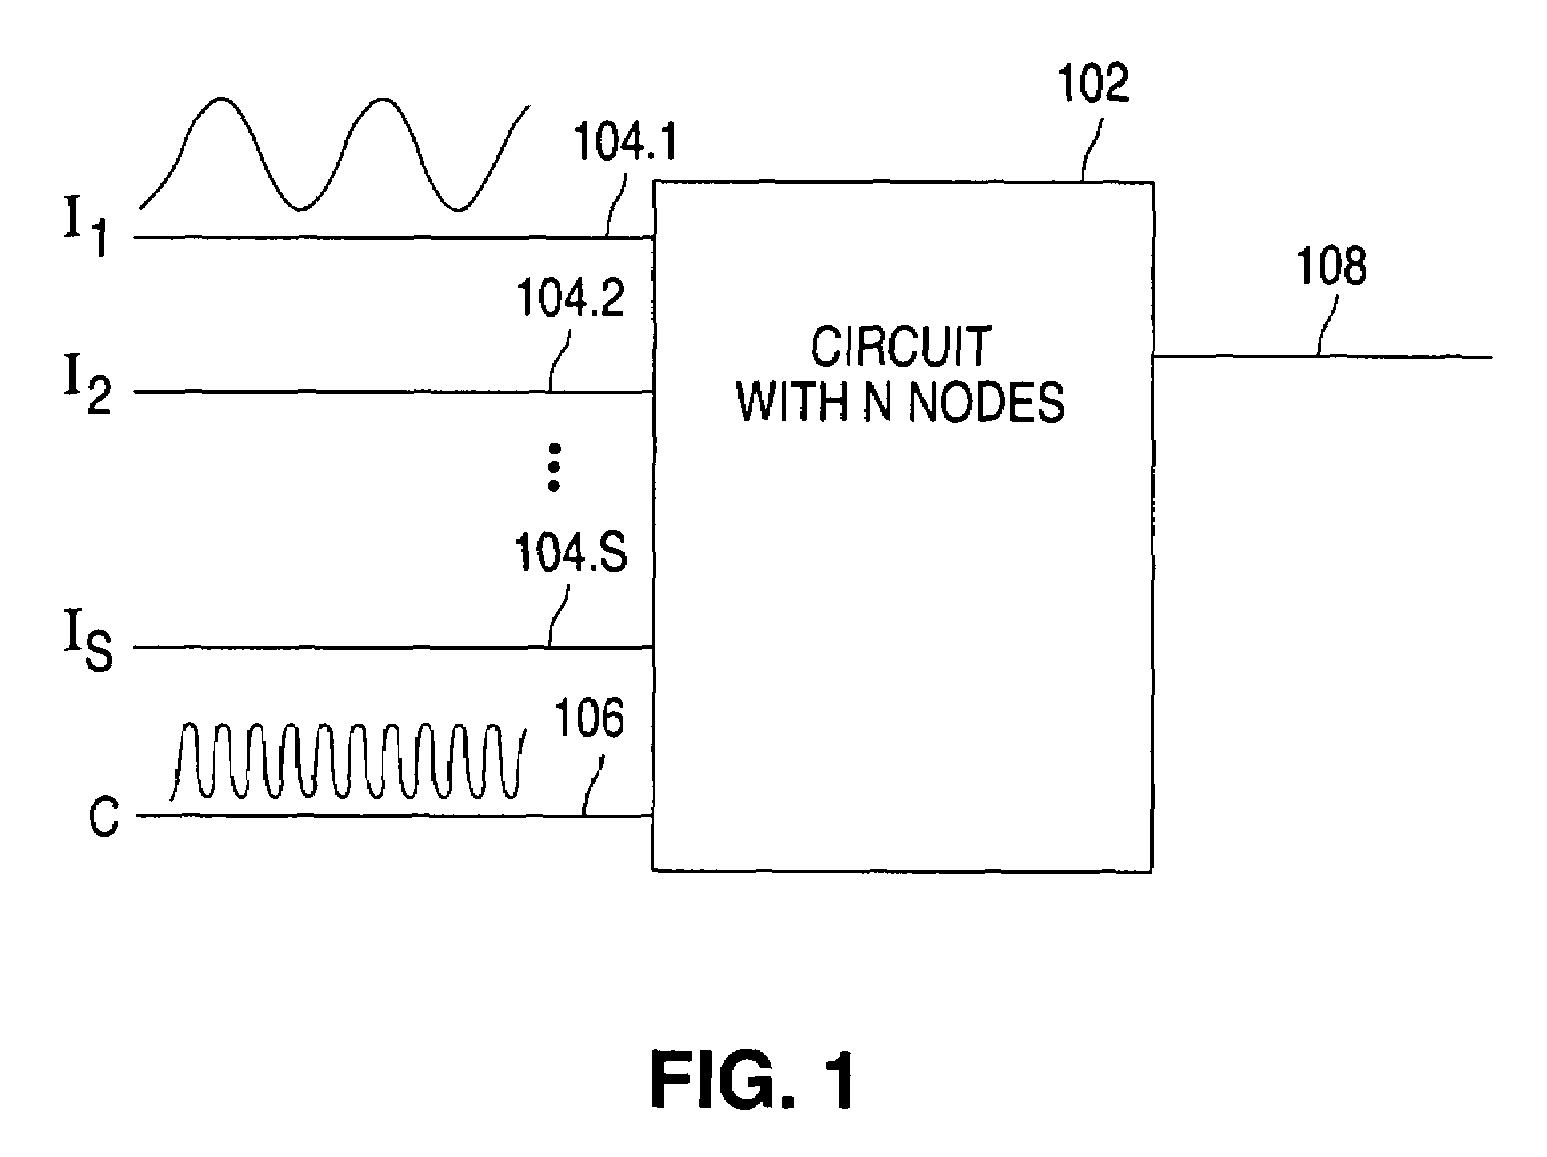 Method and apparatus for simulating quasi-periodic circuit operating conditions using a mixed frequency/time algorithm